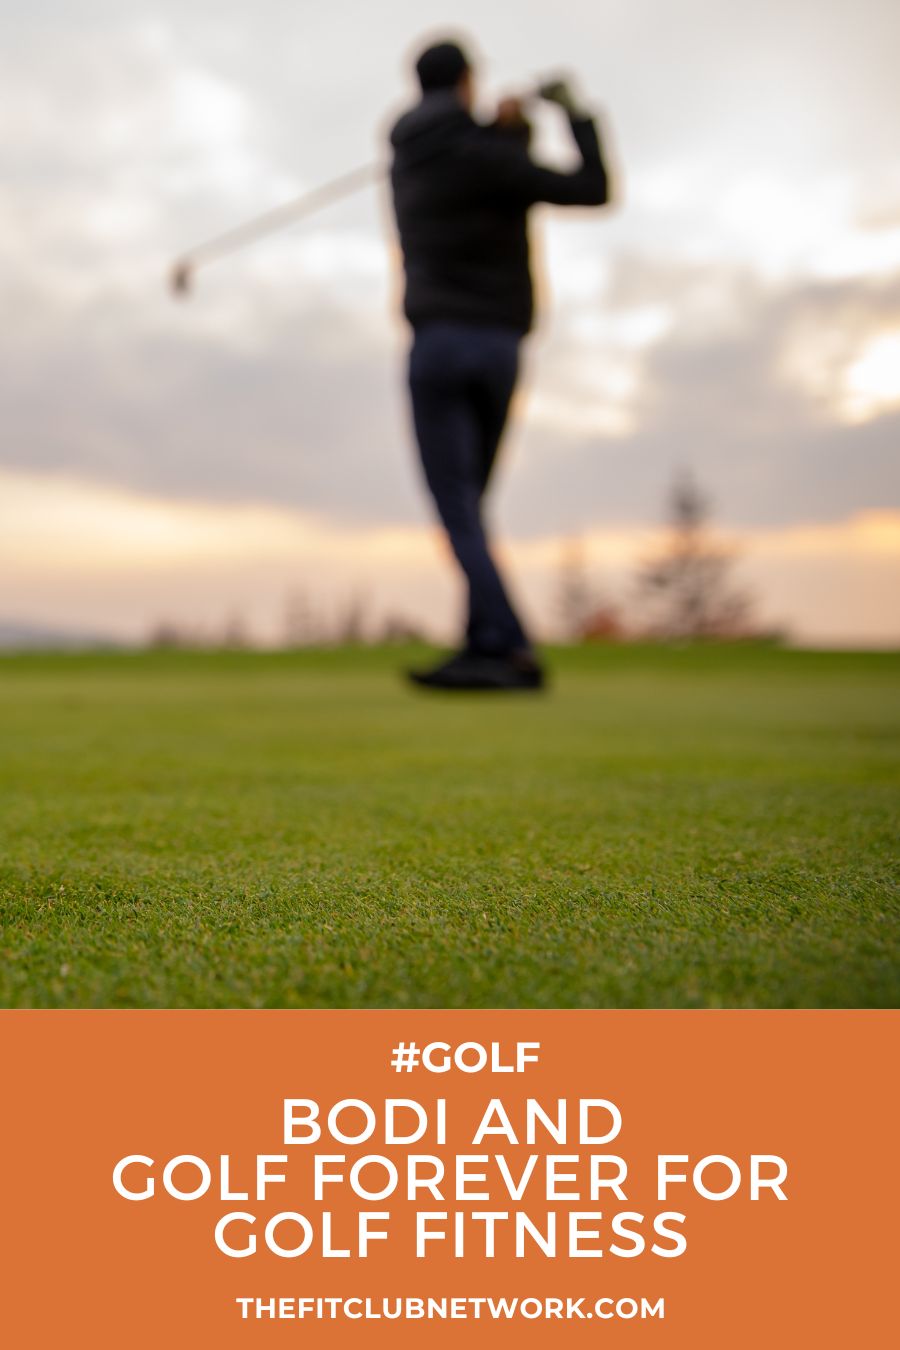 BODi and Golf Forever for Golf Fitness | THEFITCLUBNETWORK.COM